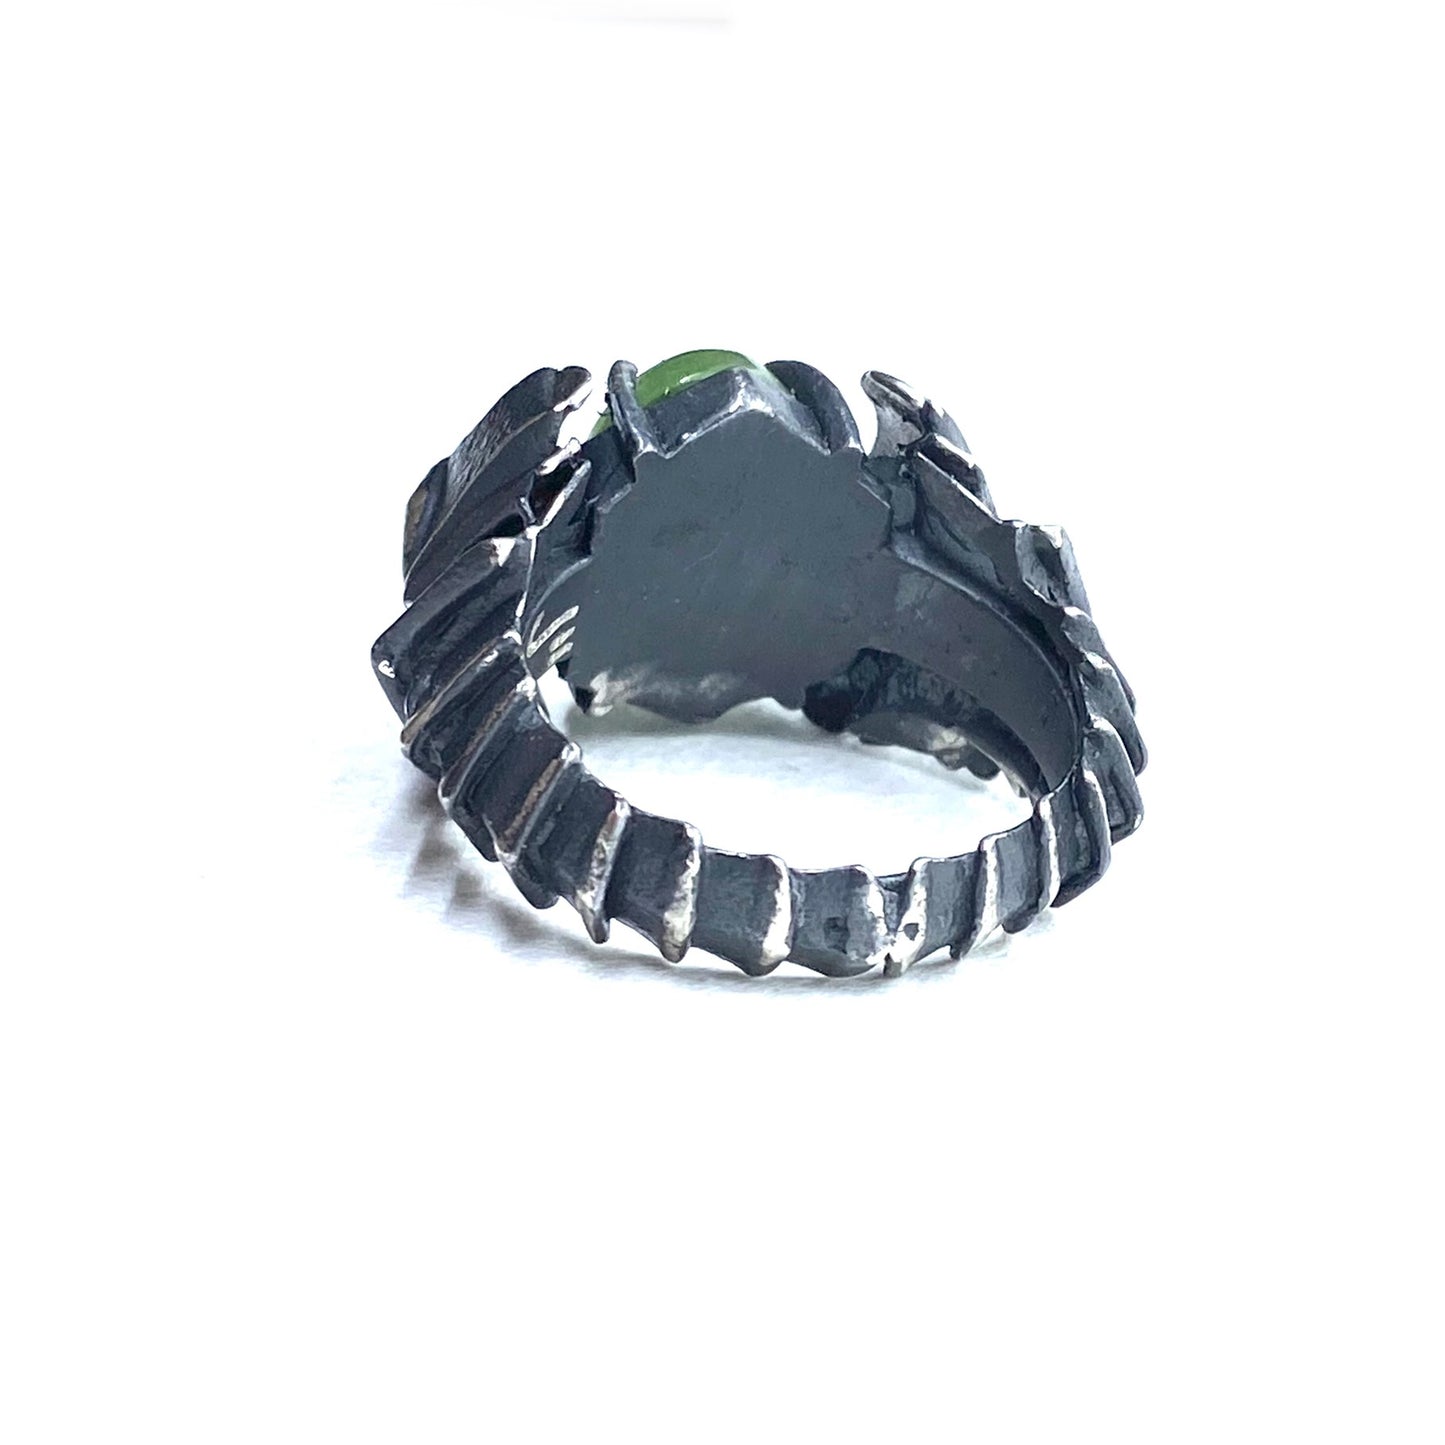 Black Knight’s Ring in Sterling silver and Moss Kyanite